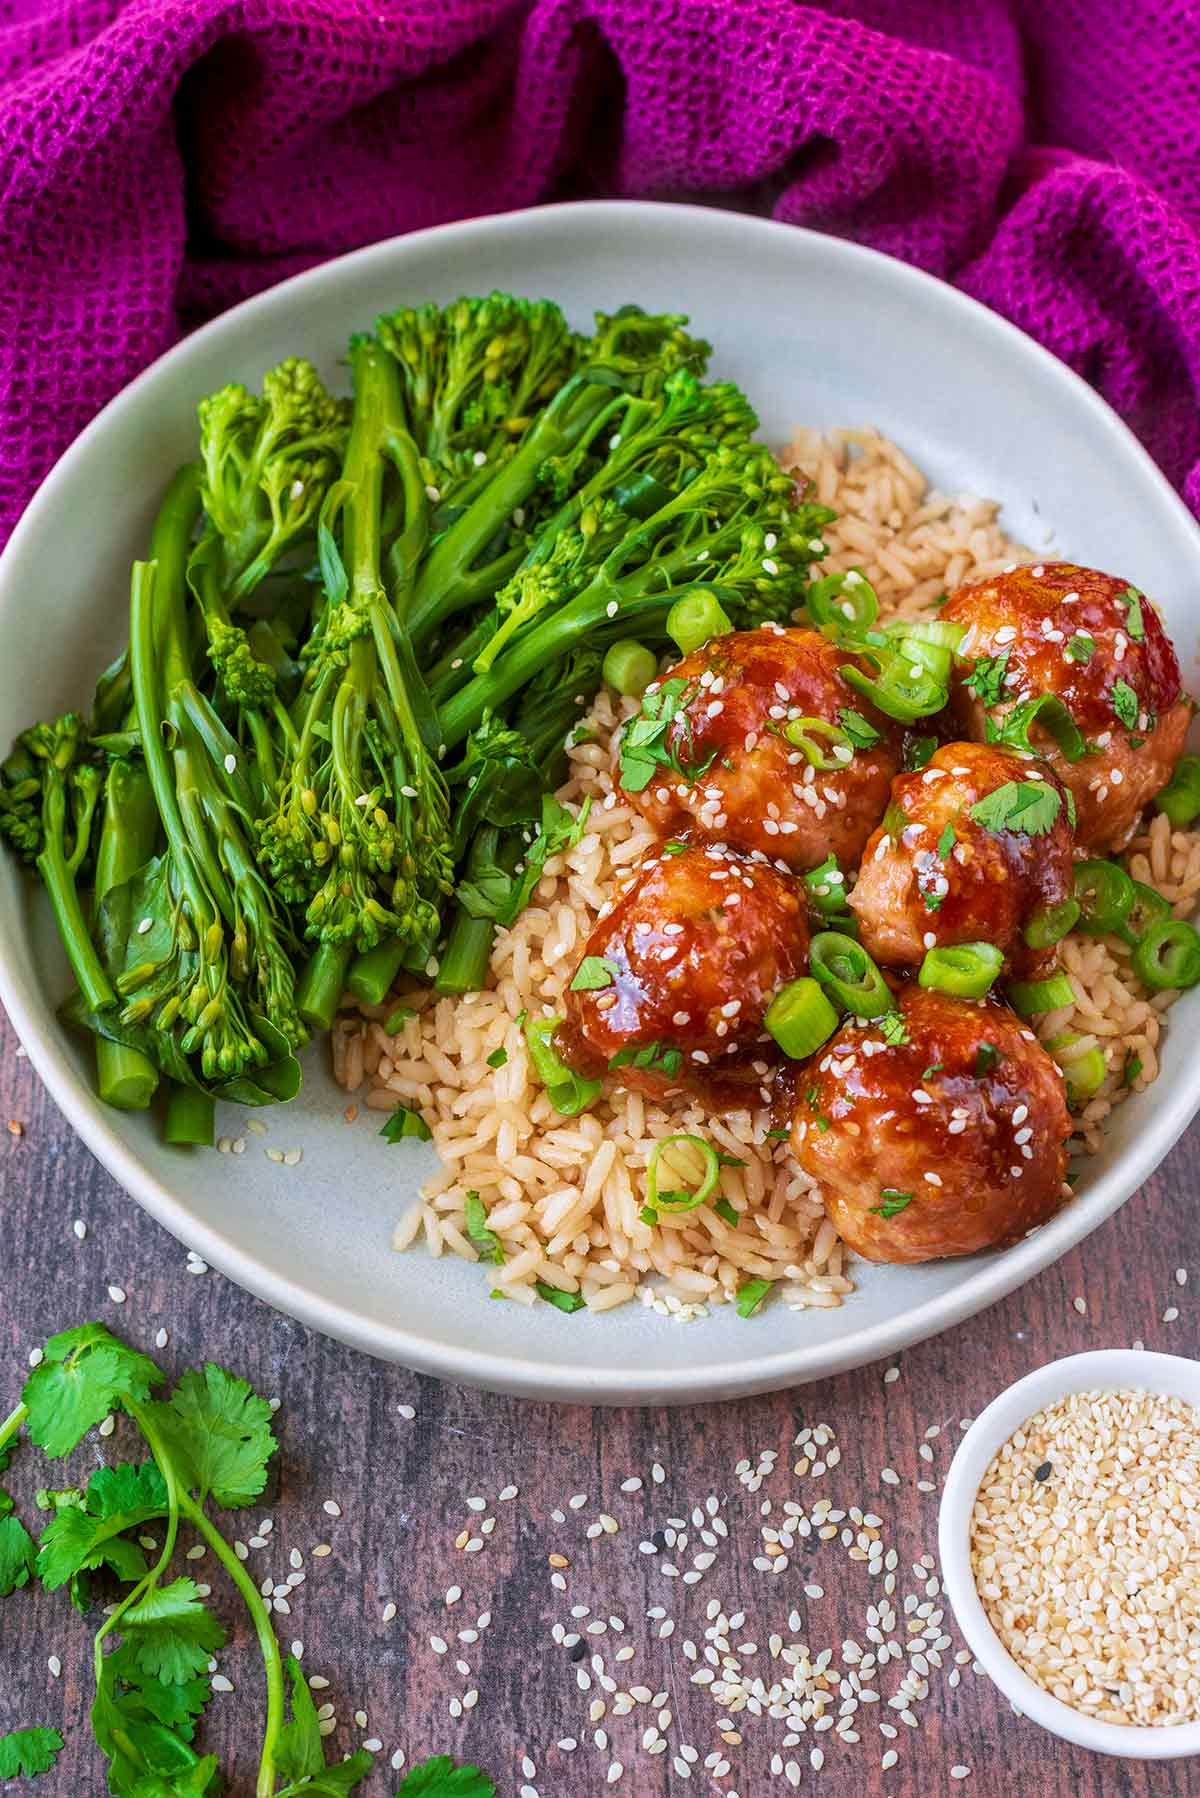 A plate of meatballs, rice and broccoli in front of a purple towel.